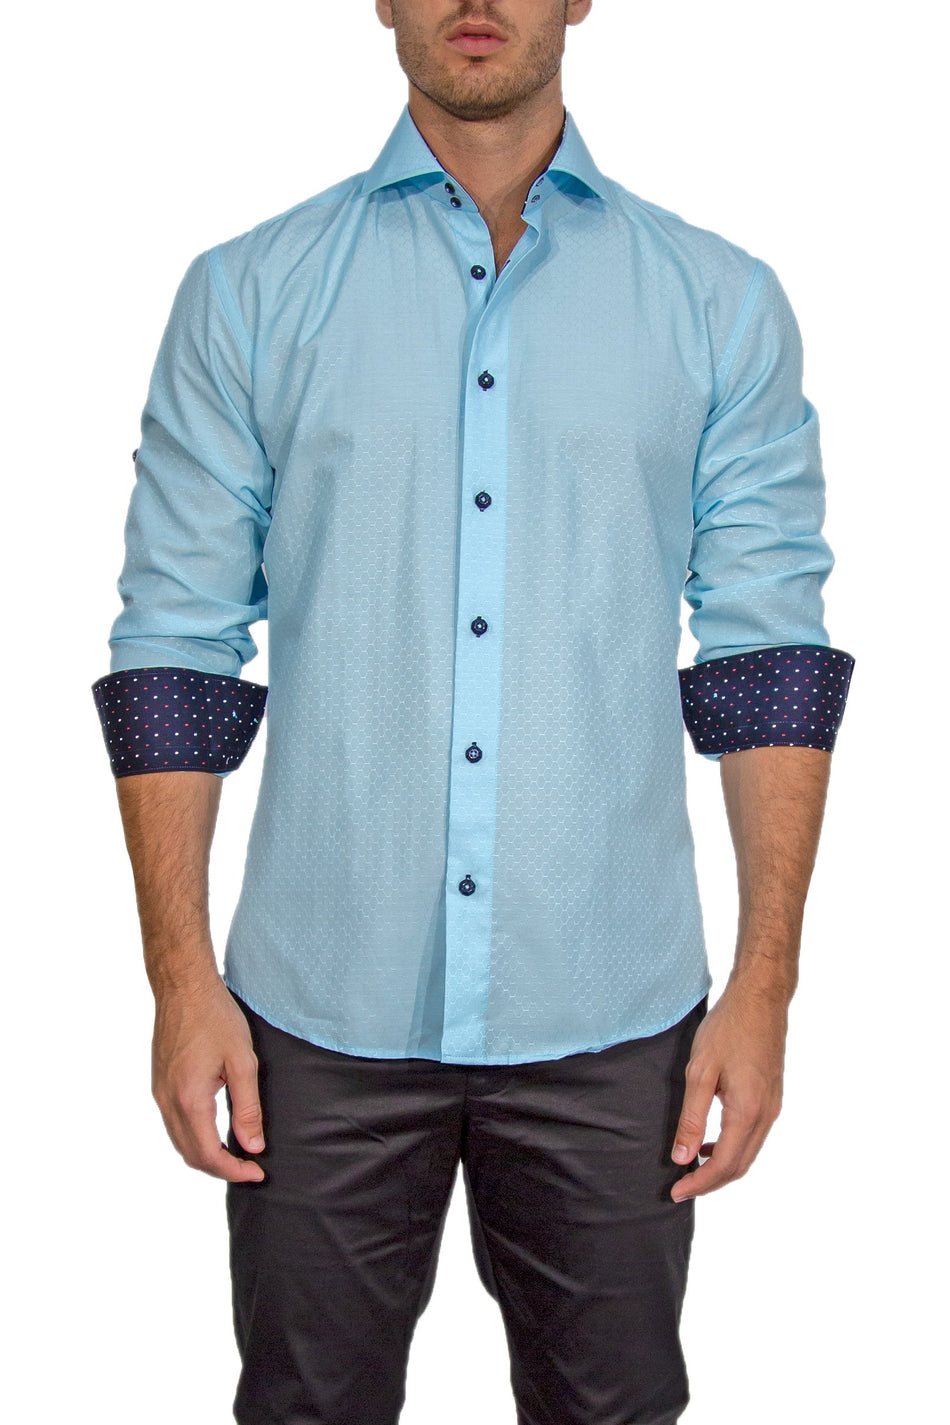 172486-mens-turquoise-button-up-long-sleeve-dress-shirt